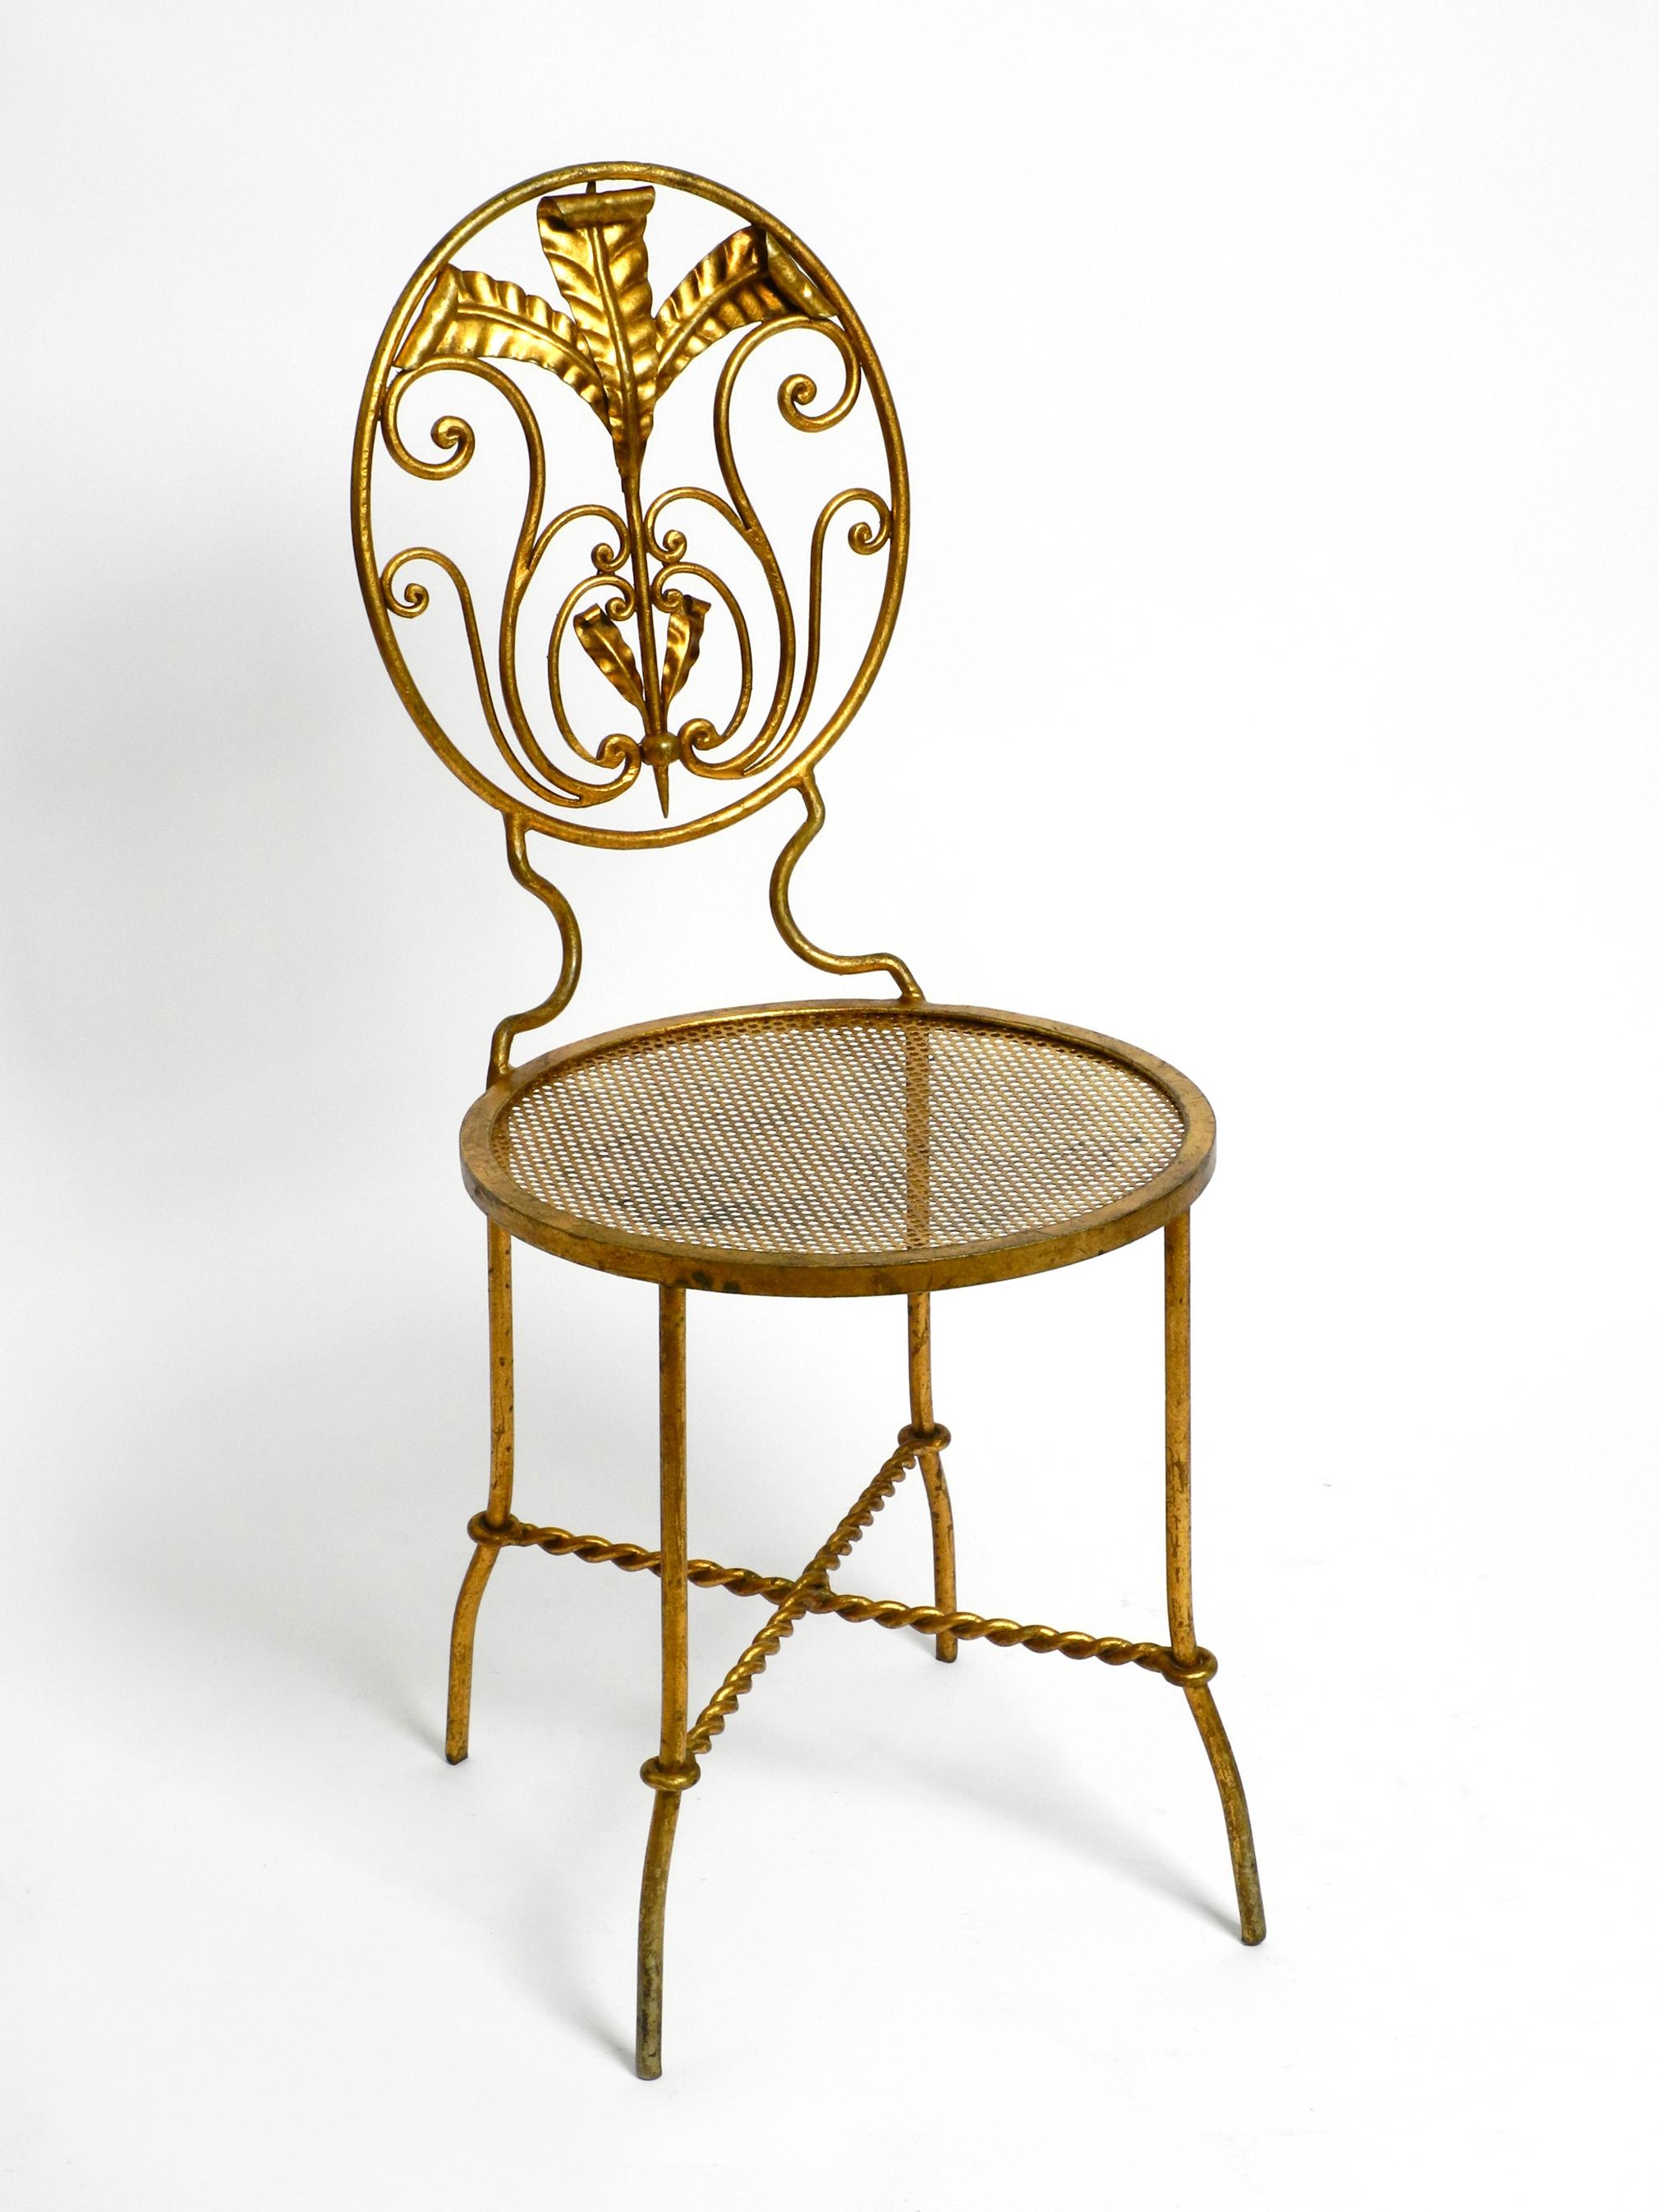 Beautiful Italian 70's Regency Design Gold Plated Wrought Iron Chair For Sale 13